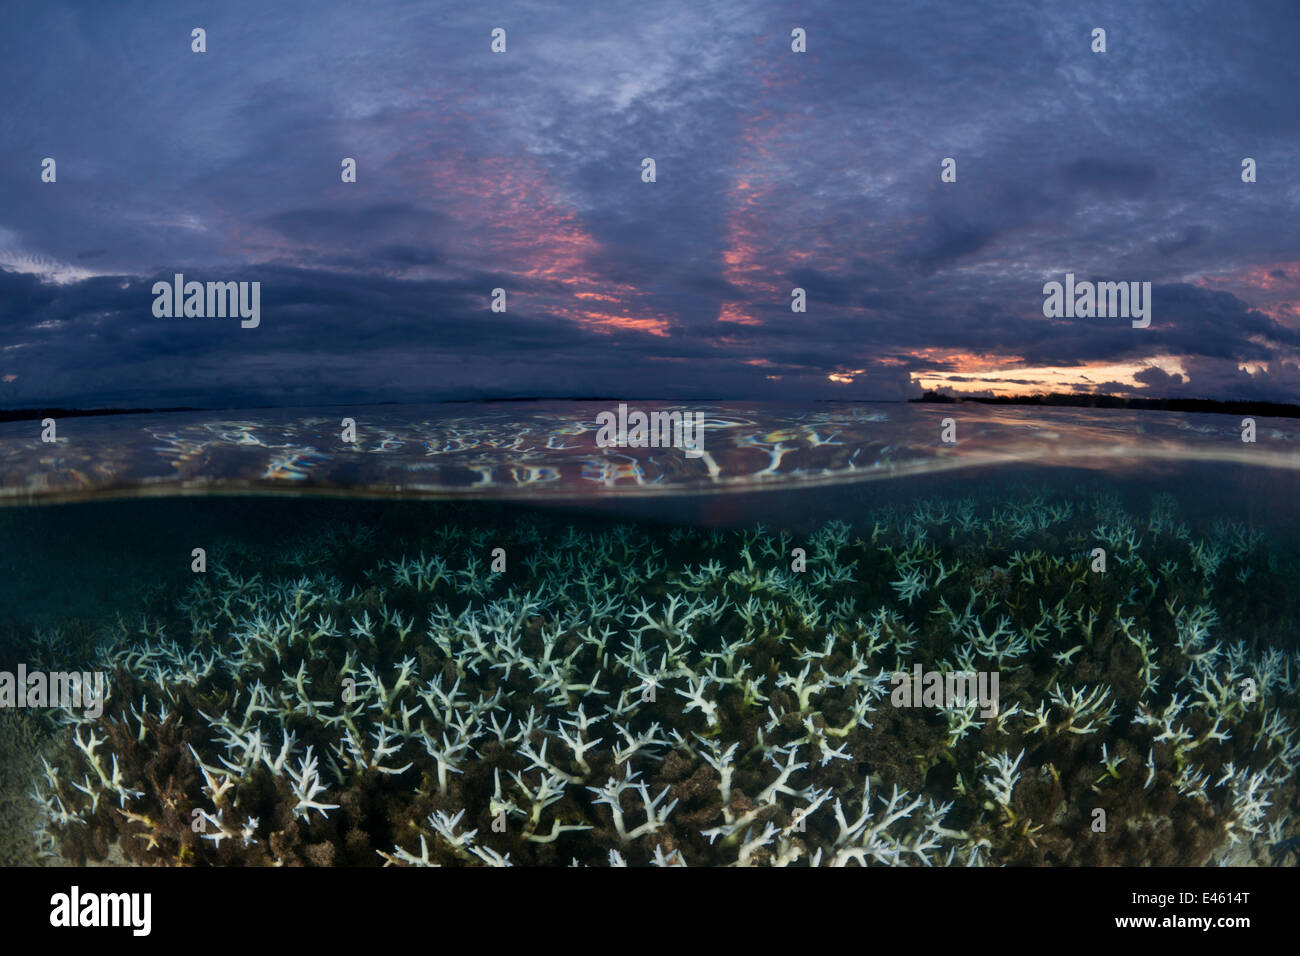 Split level image of shallow bleaching corals at sunset, New Ireland, Papua New Guinea Stock Photo